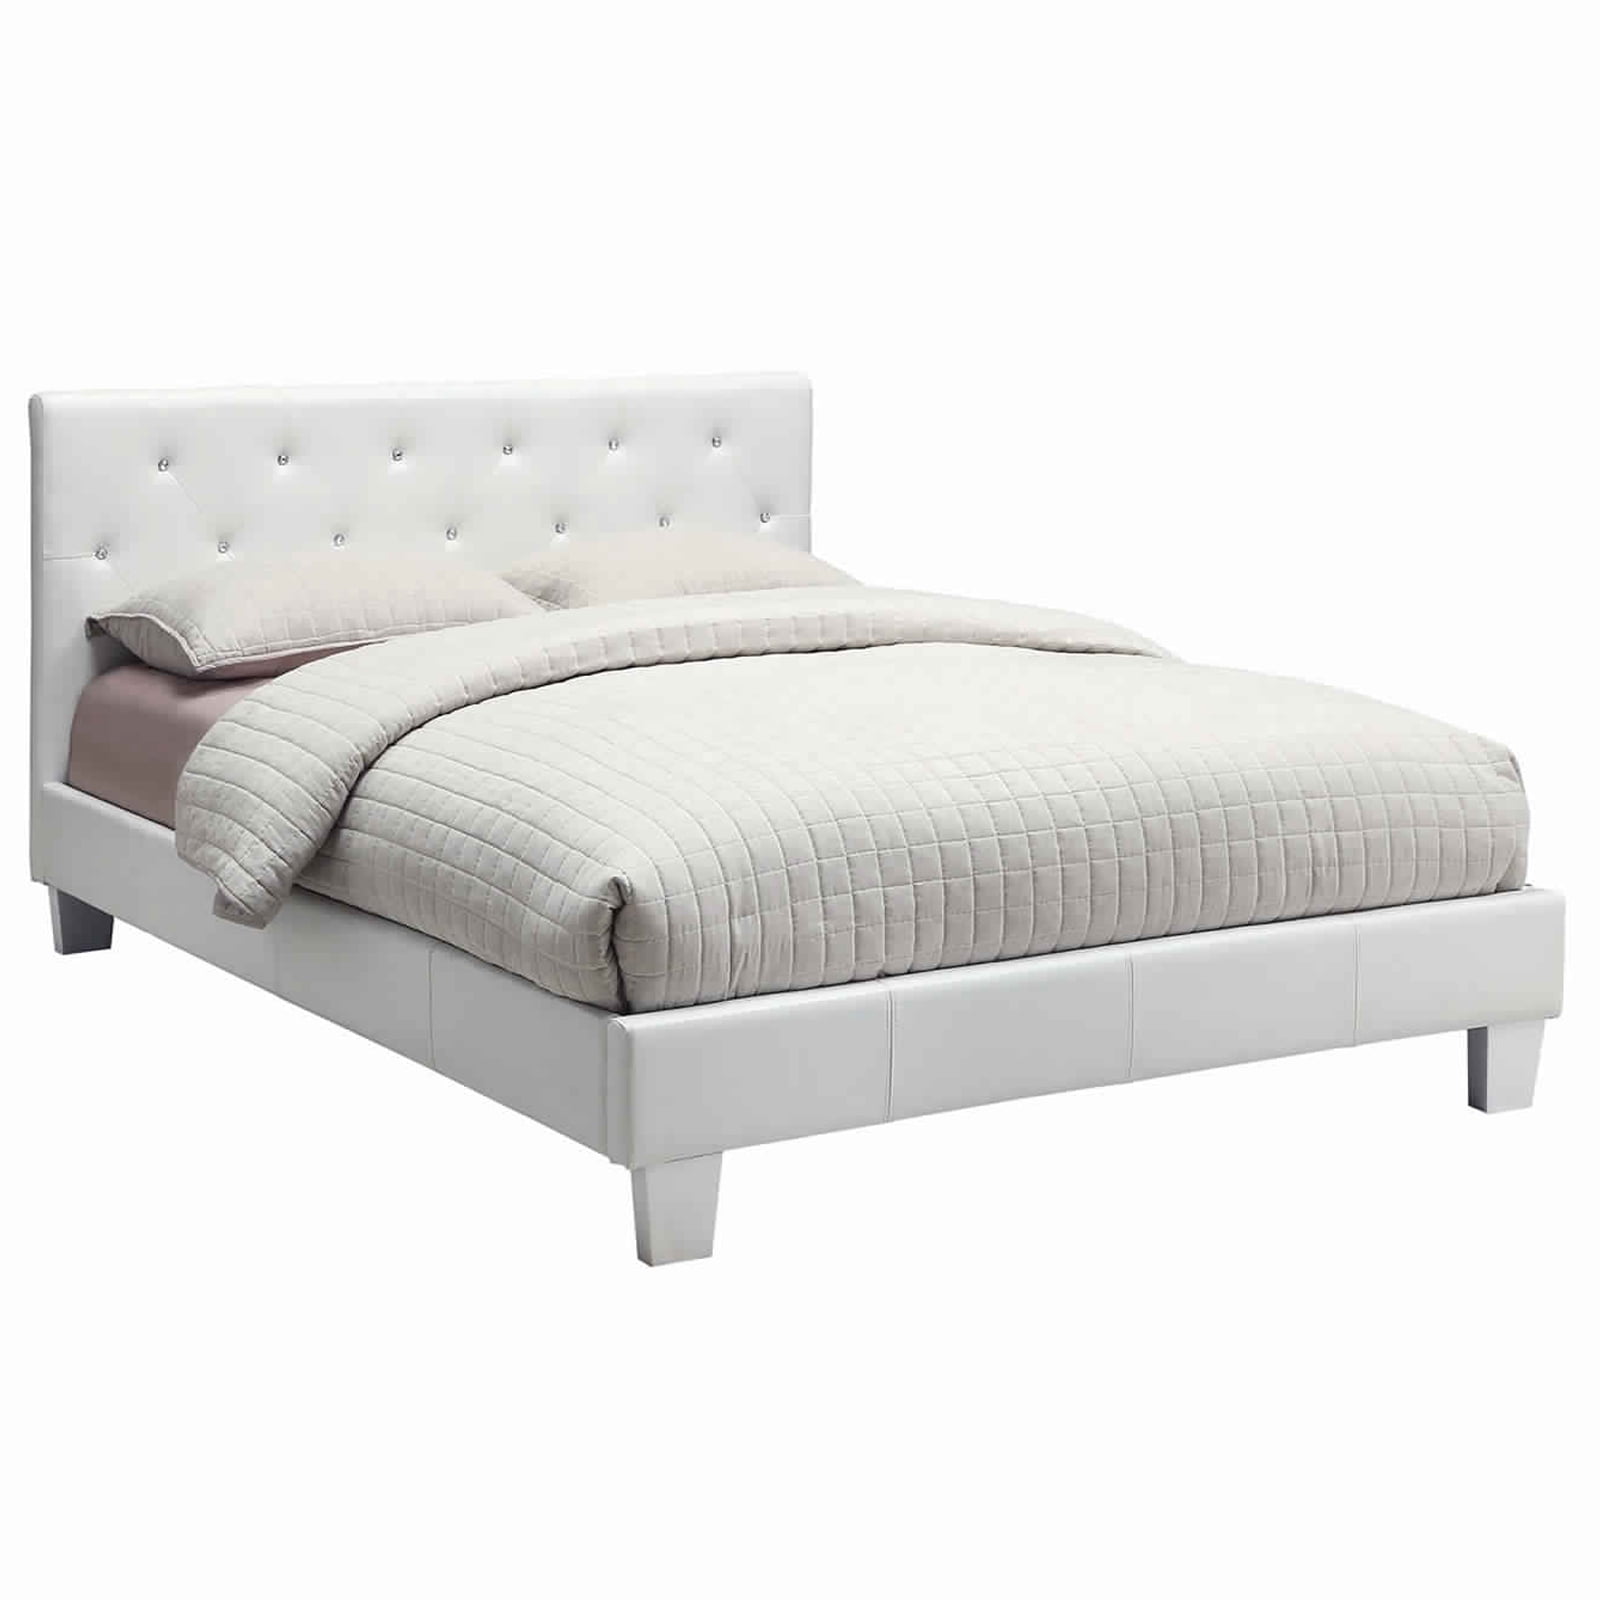 Benzara Low Profile Queen Size Bed with Button Tufted Headboard, White ...